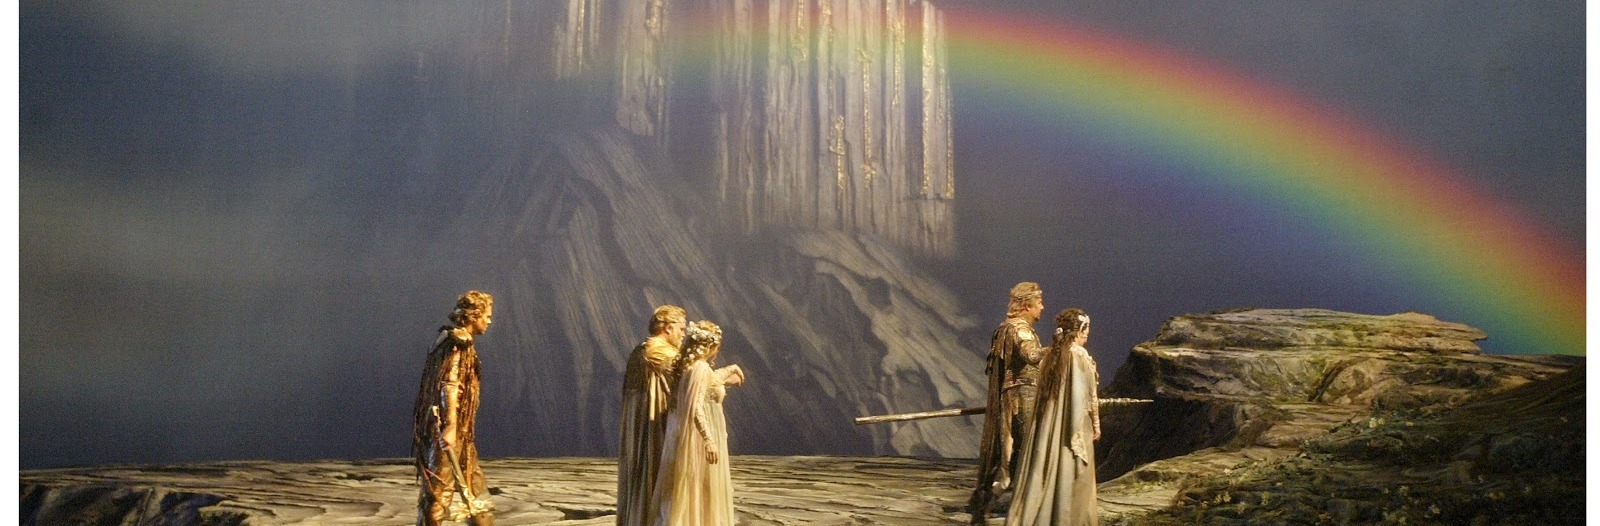 A scene from Wagner's Das Rheingold. People walking toward a rainbow with a mountain or castle in the background.